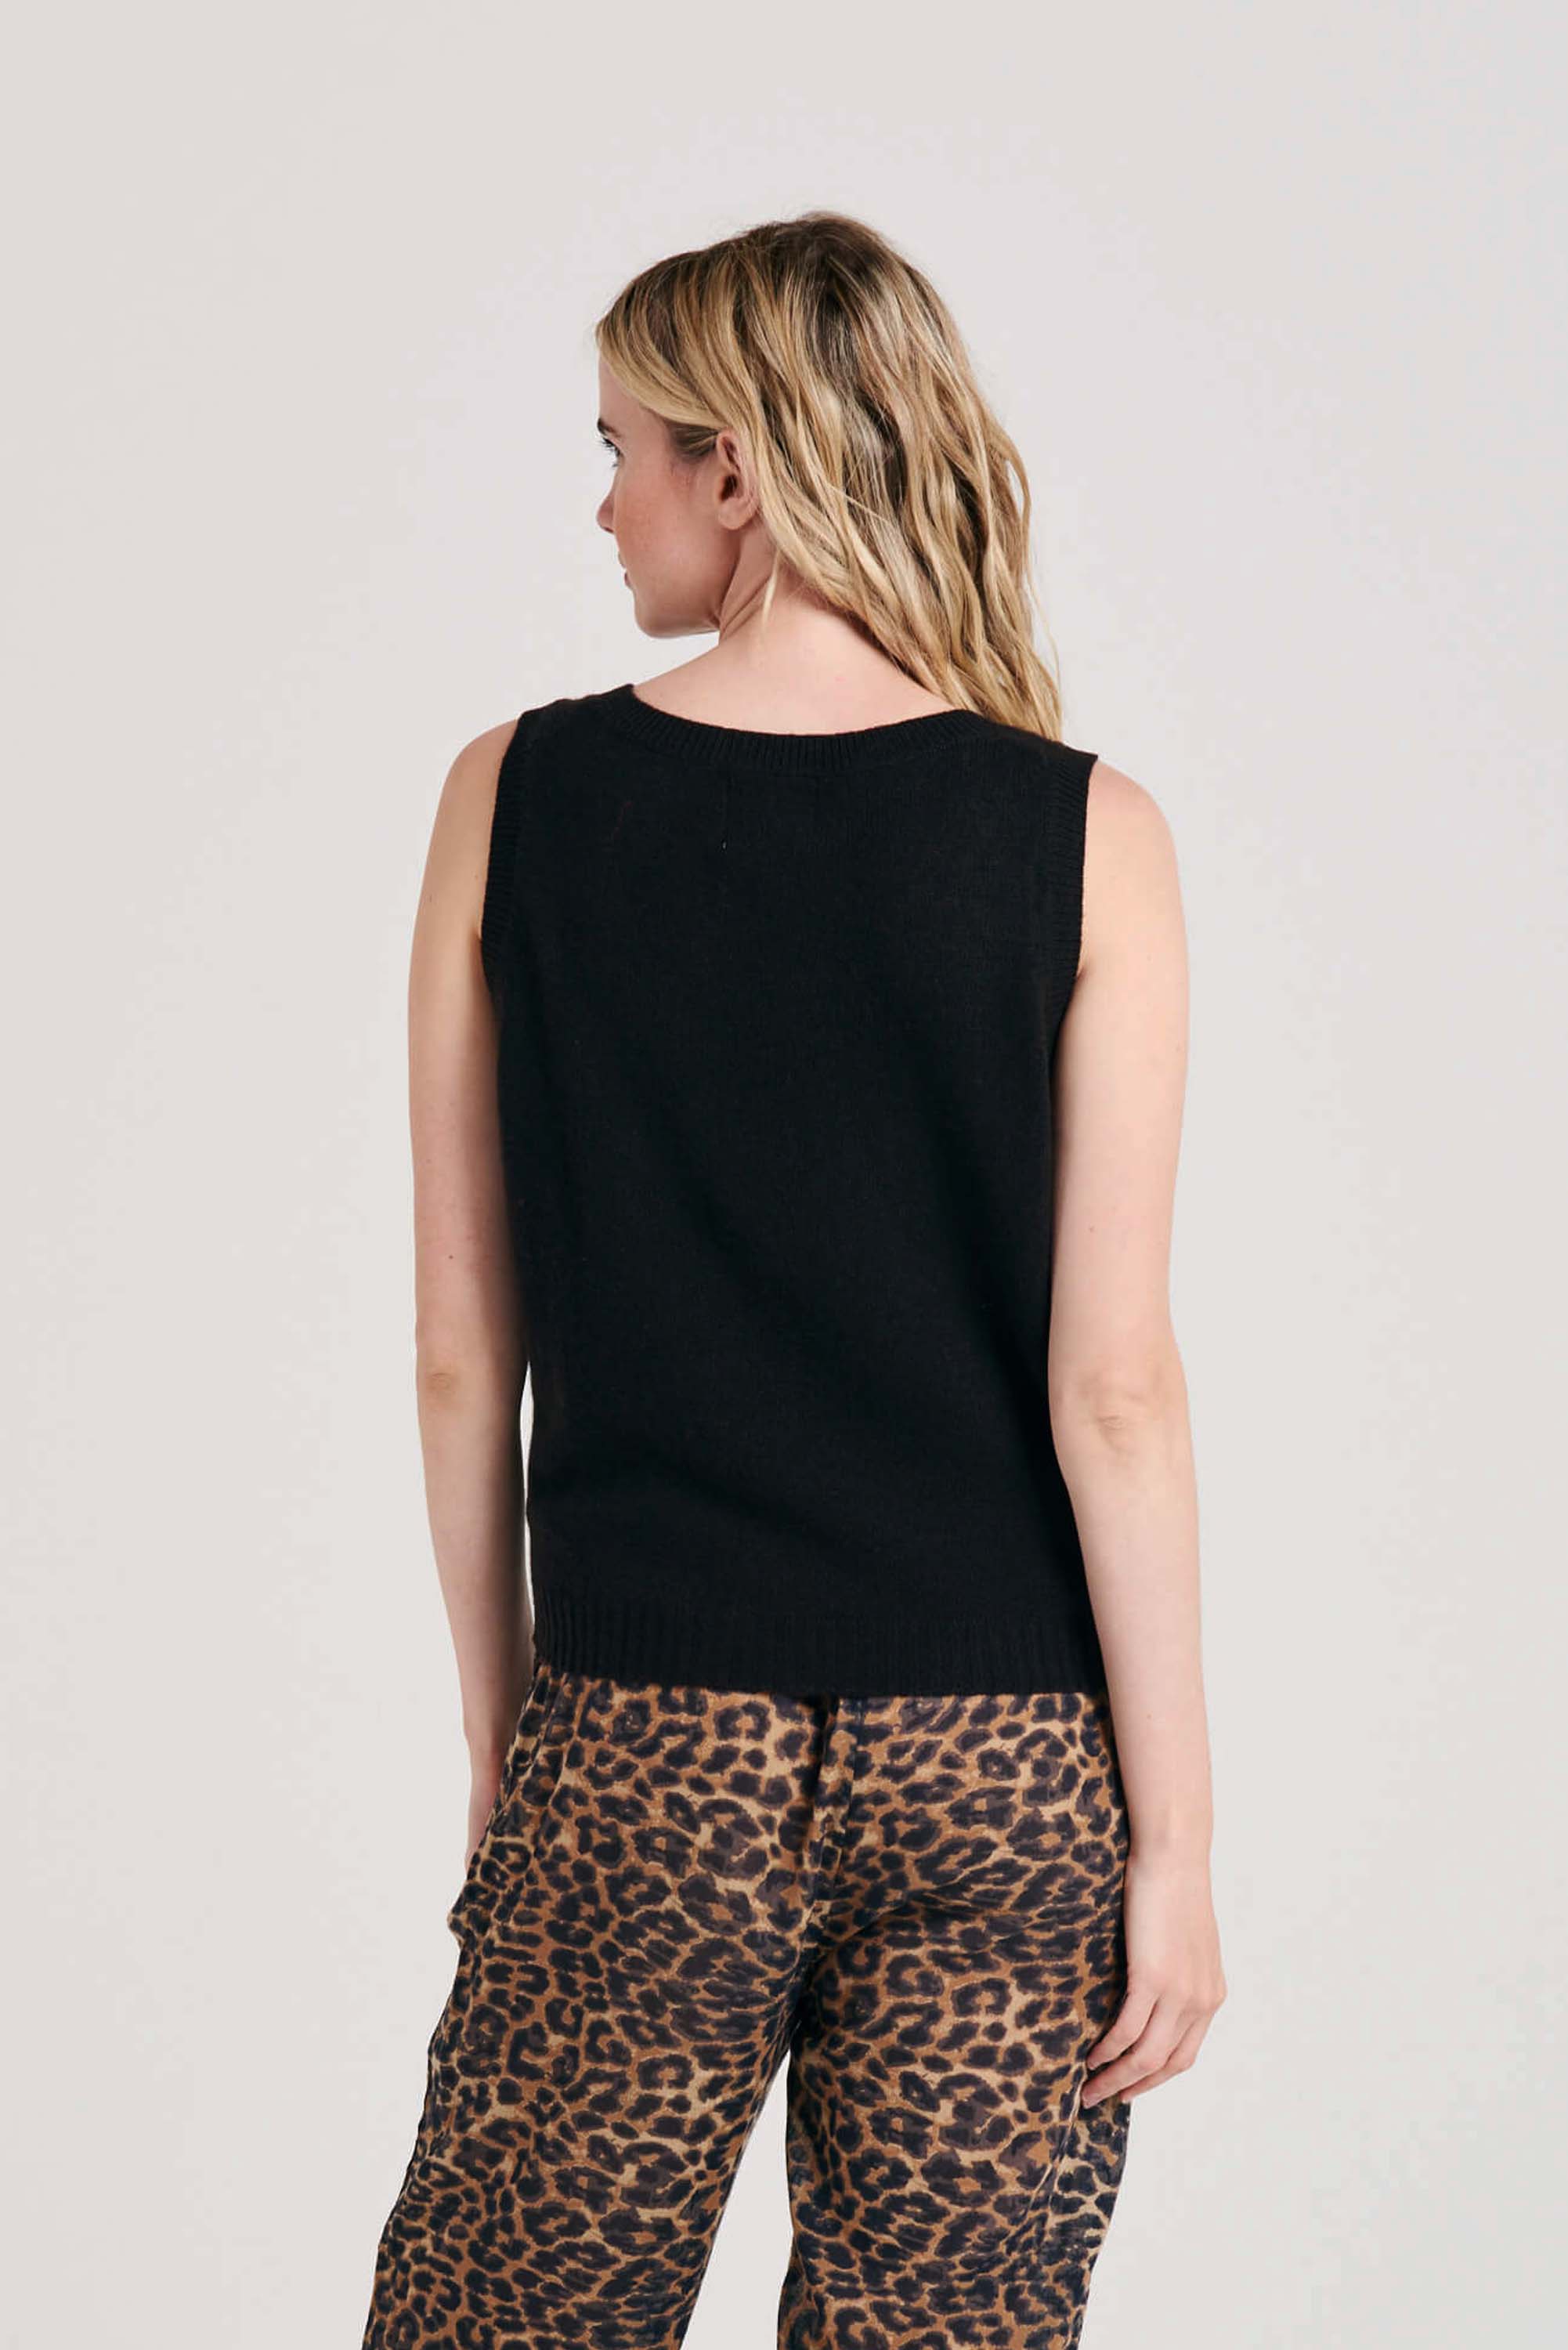 Blonde female model wearing Jumper1234 lightweight cashmere tank in dark brown facing away from the camera